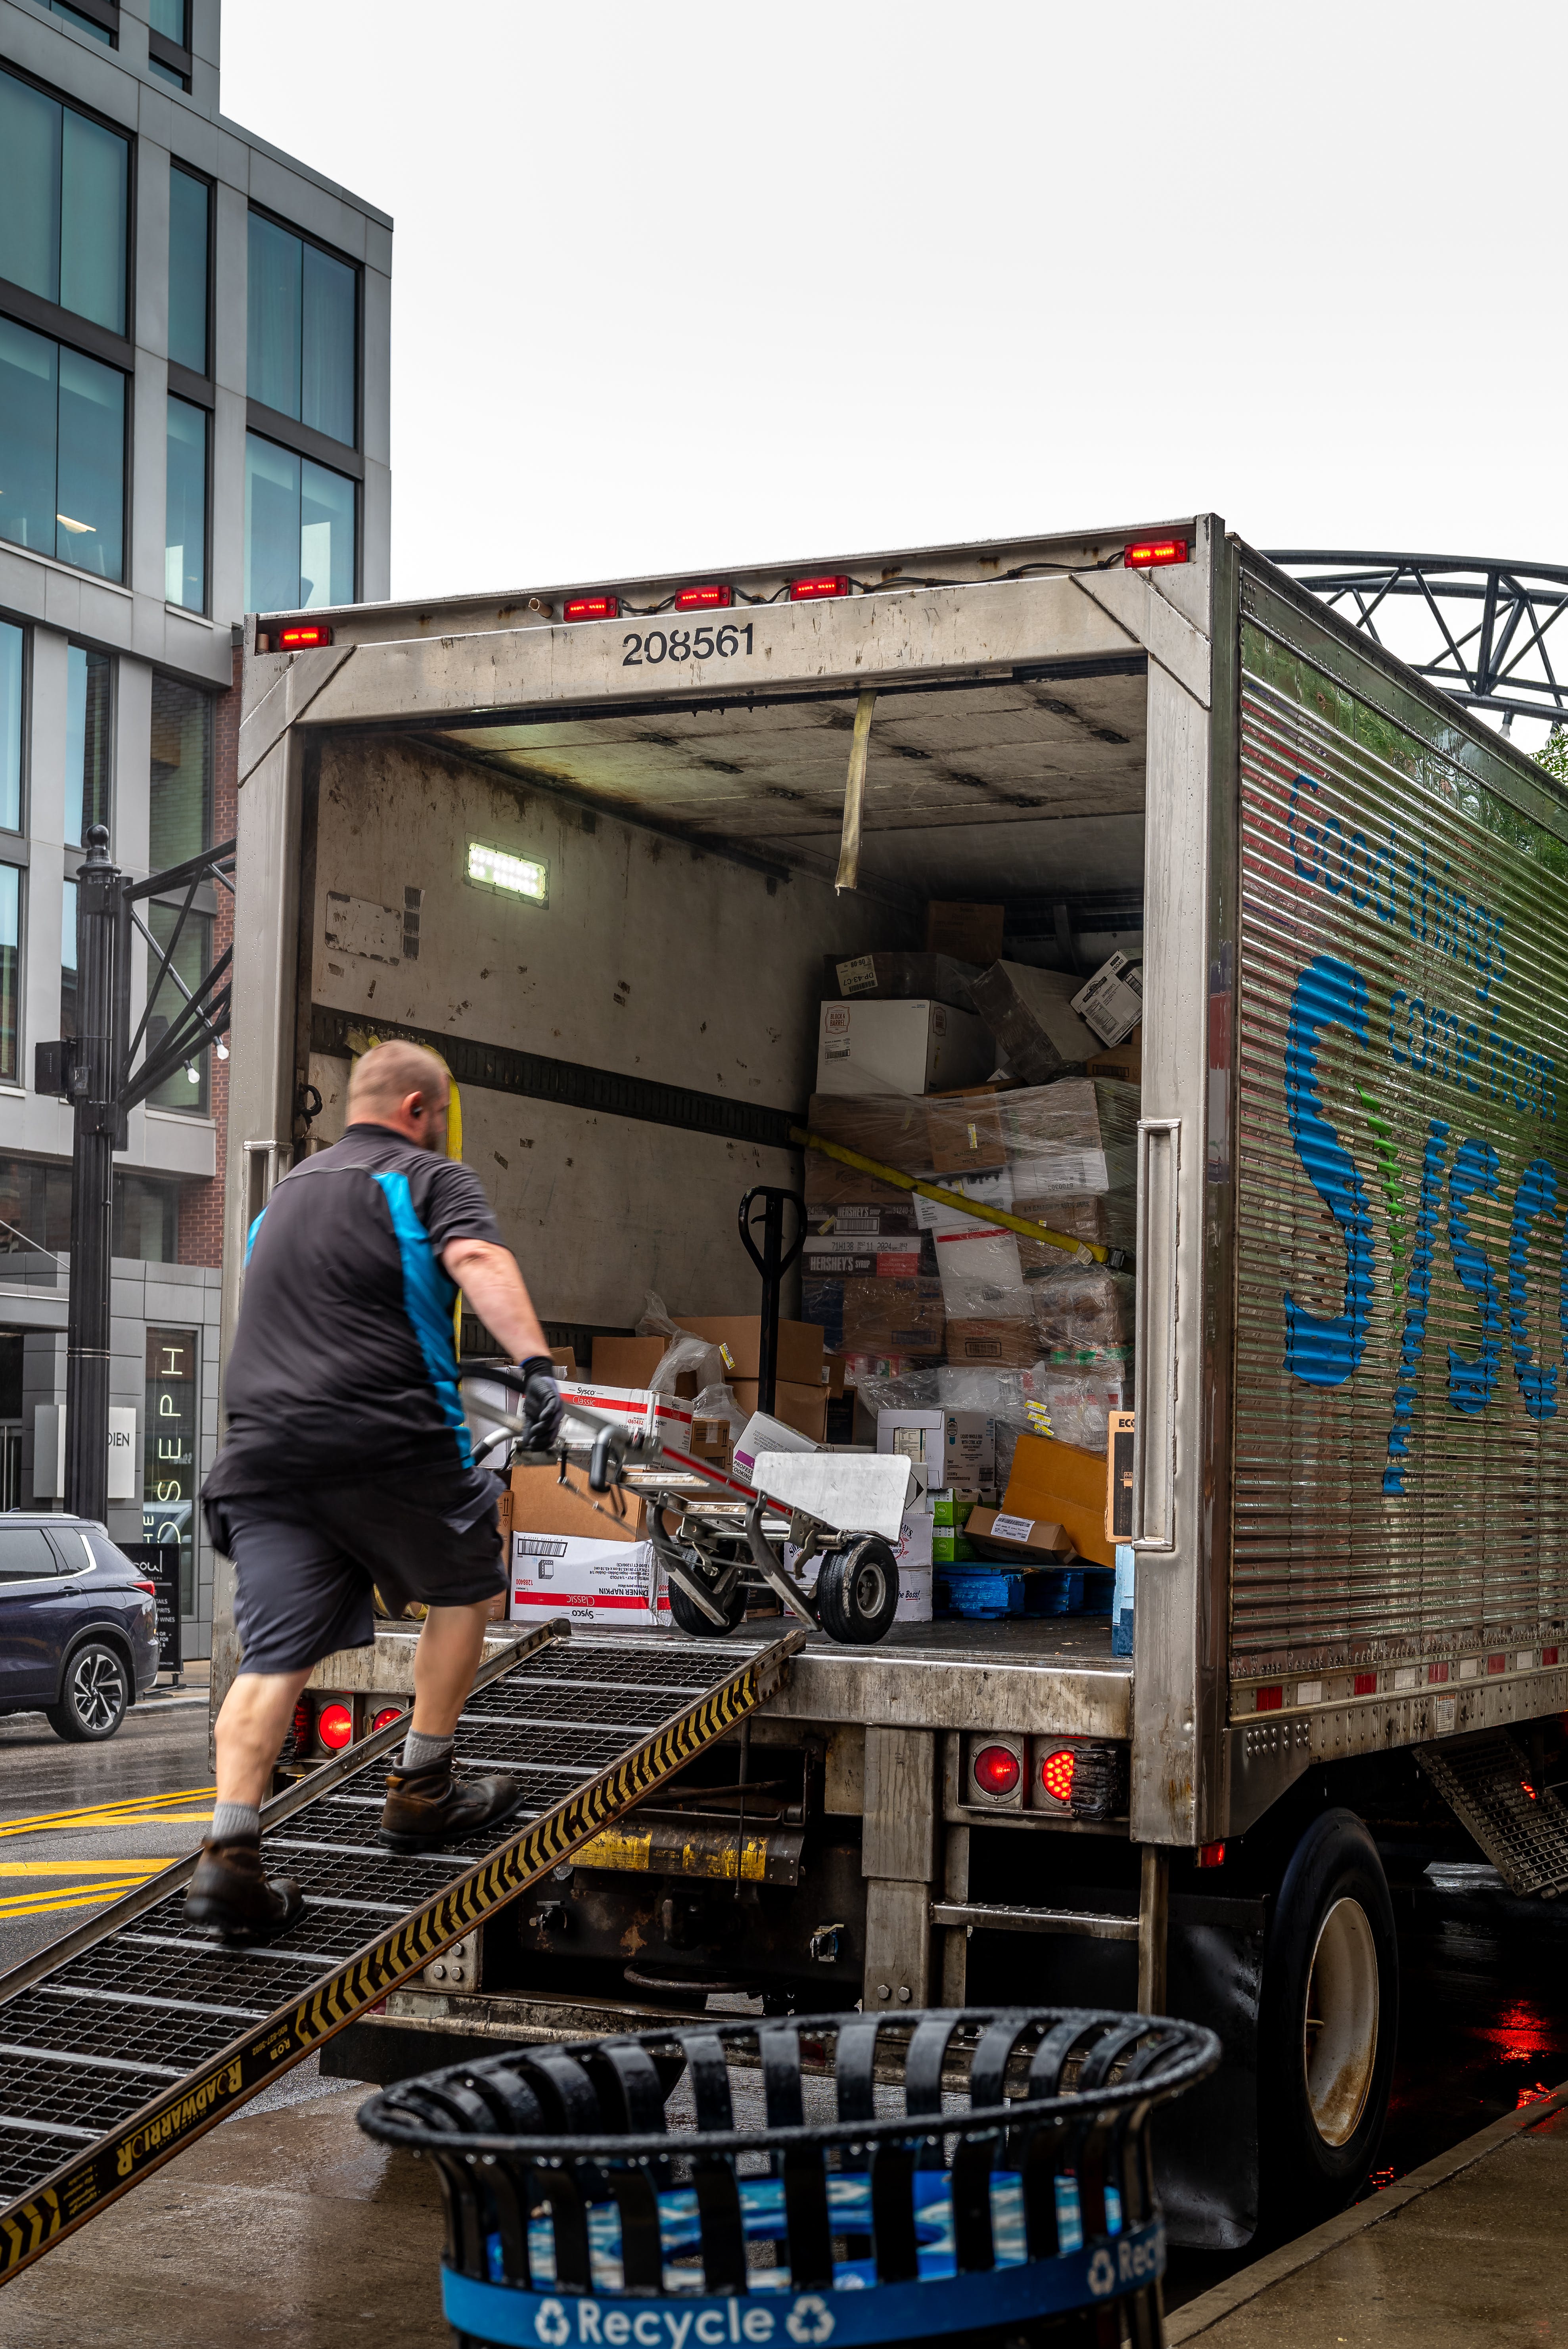 A man loading packages into the back of a semi-truck